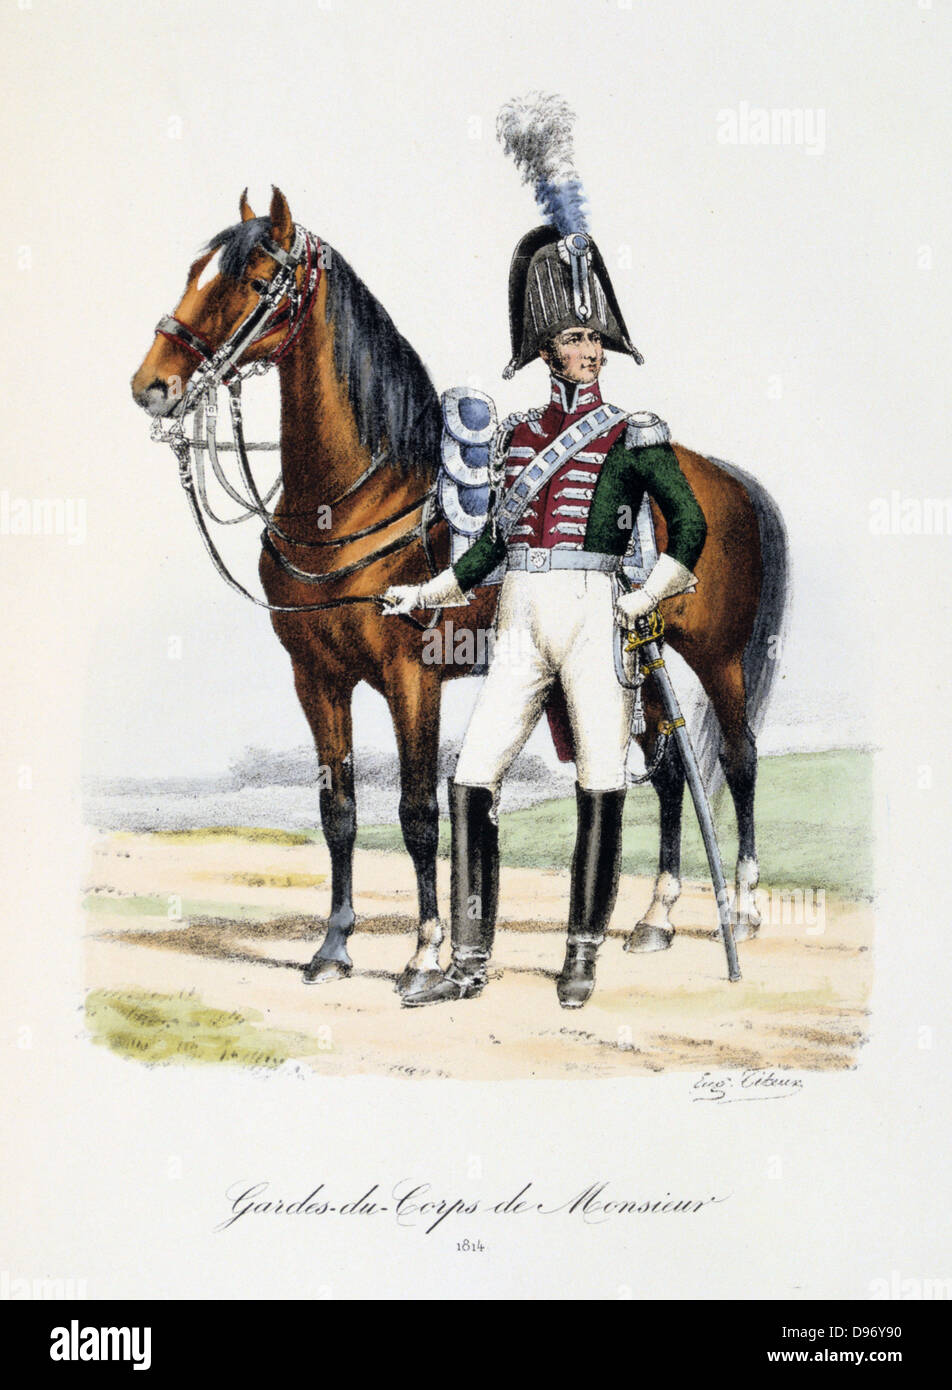 Mounted officer Royal of the bodyguard of the heir to the throne, 1814. From 'Histoire de la maison militaire du Roi de 1814 a 1830' by Eugene Titeux, Paris, 1890. Stock Photo